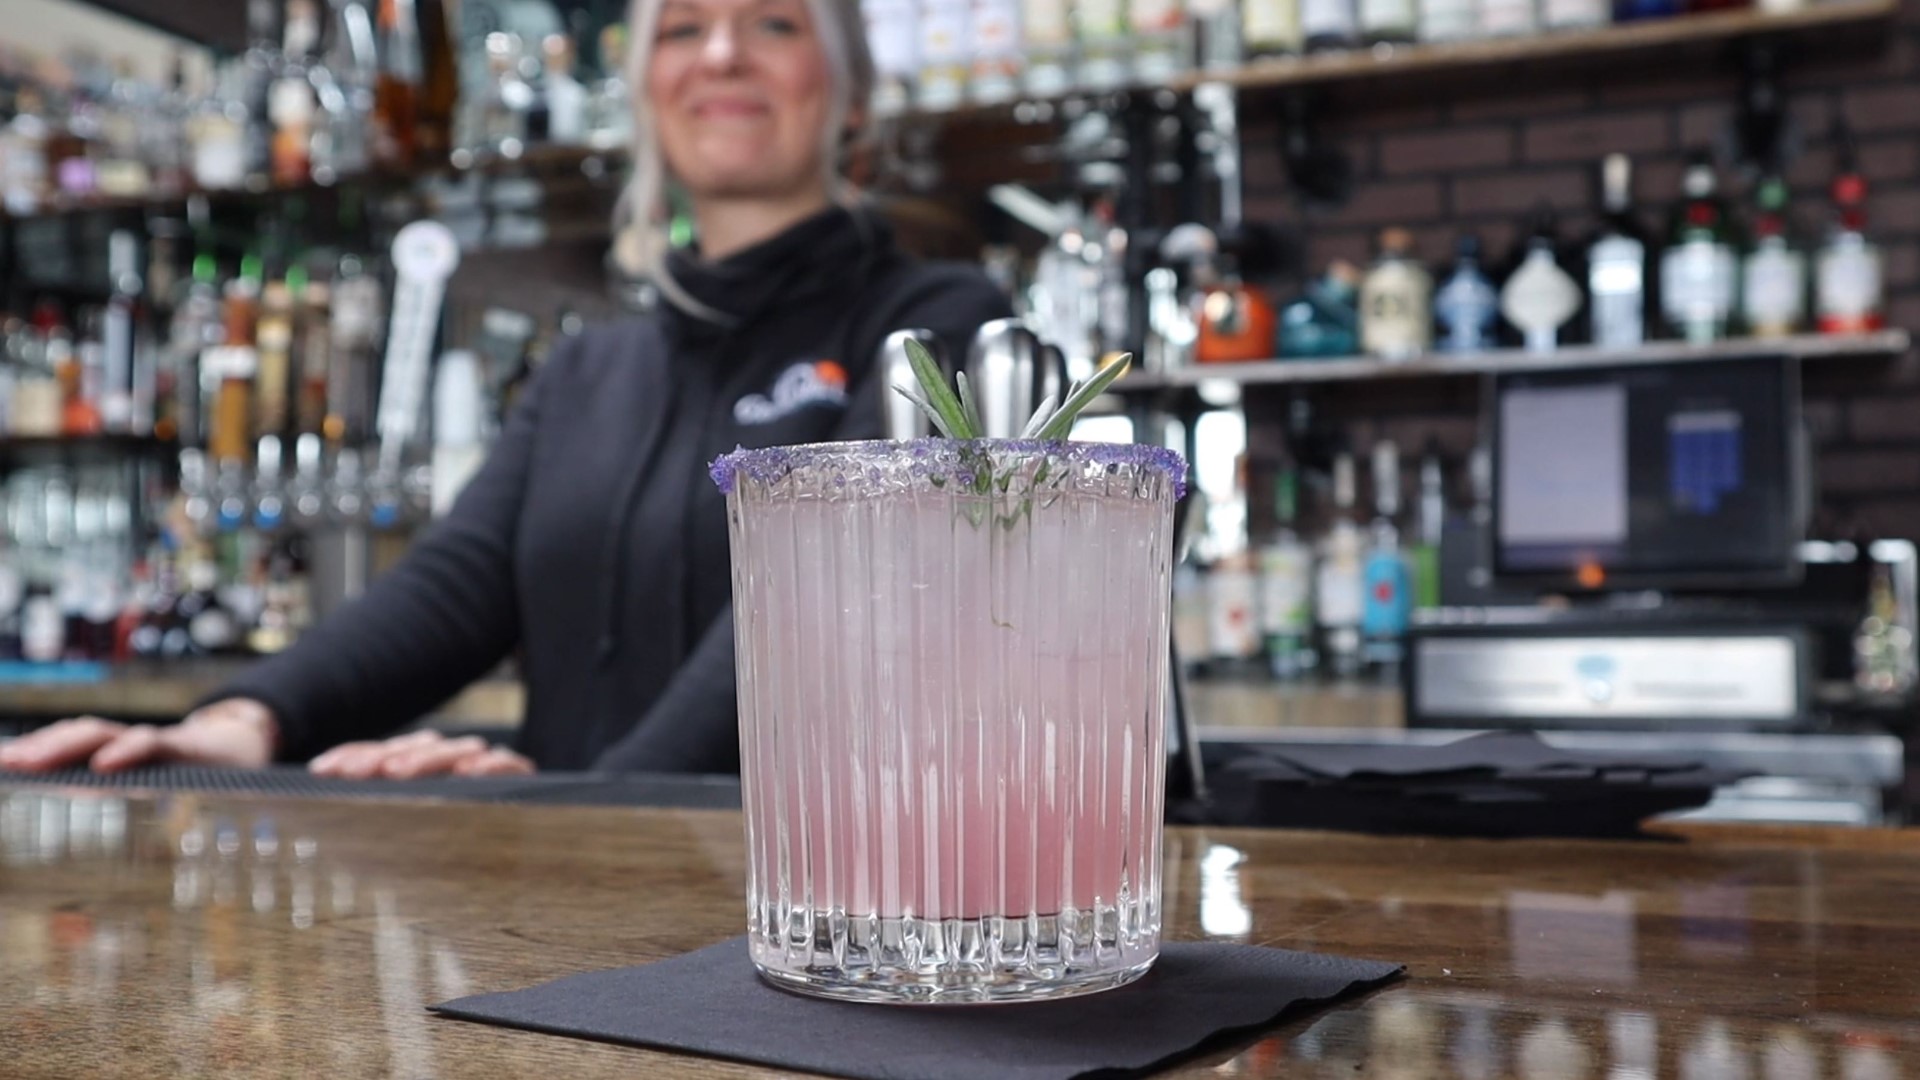 Whether you are practicing "Dry January" or looking for fun craft cocktails The Gristmill Bar in Port Clinton has you covered.